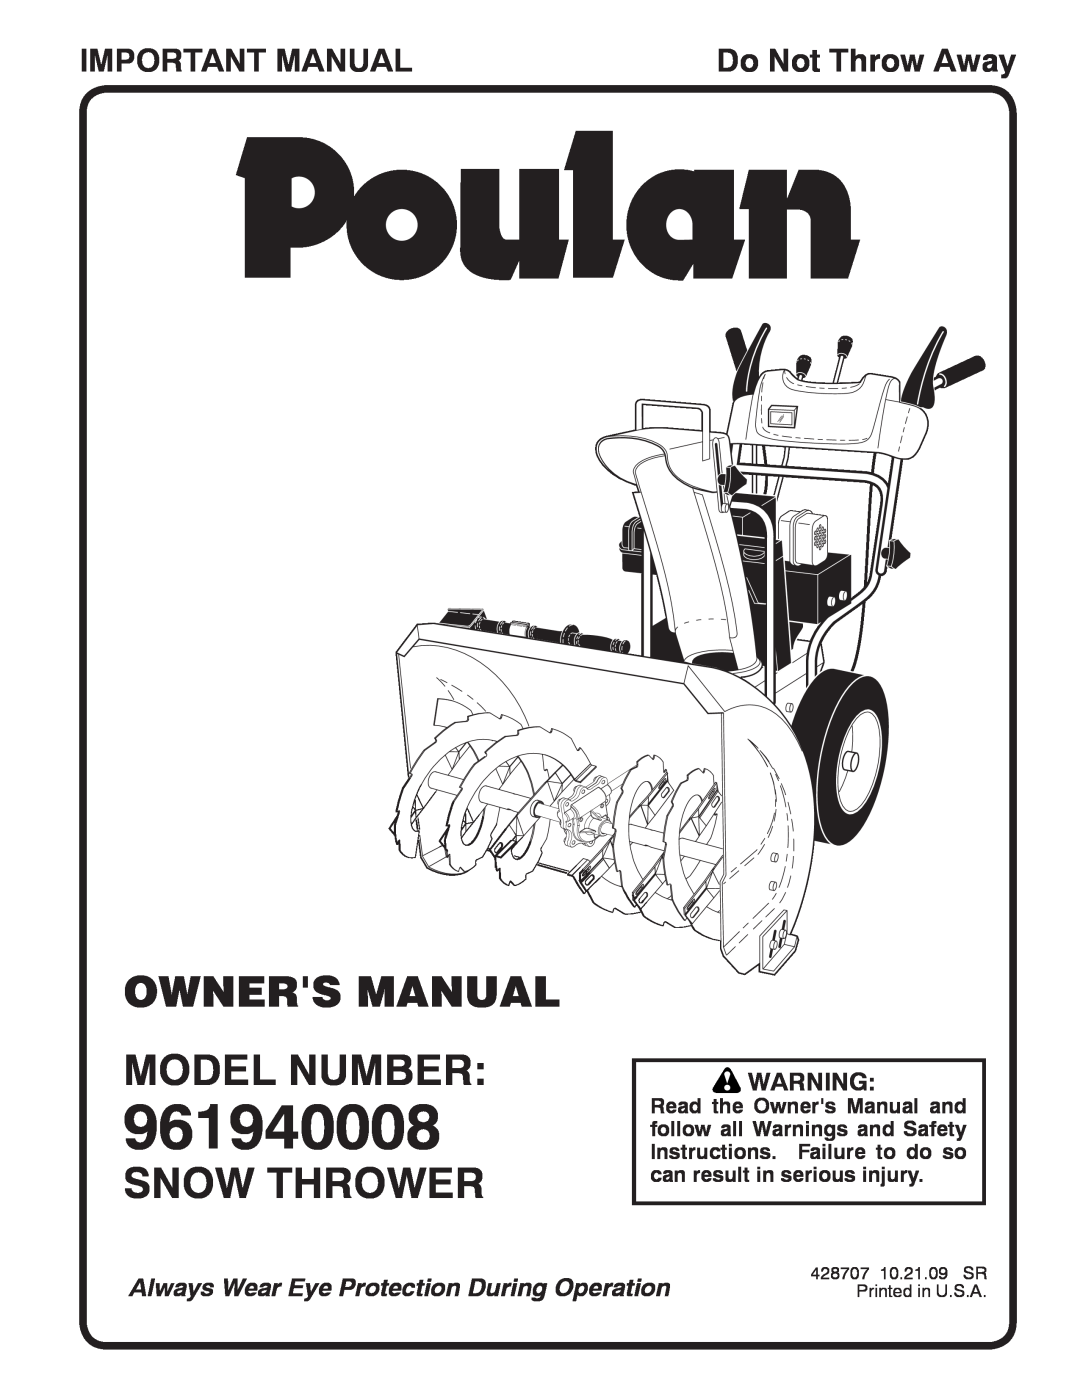 Poulan 428707, 96194000801 owner manual Snow Thrower, Important Manual, Do Not Throw Away 